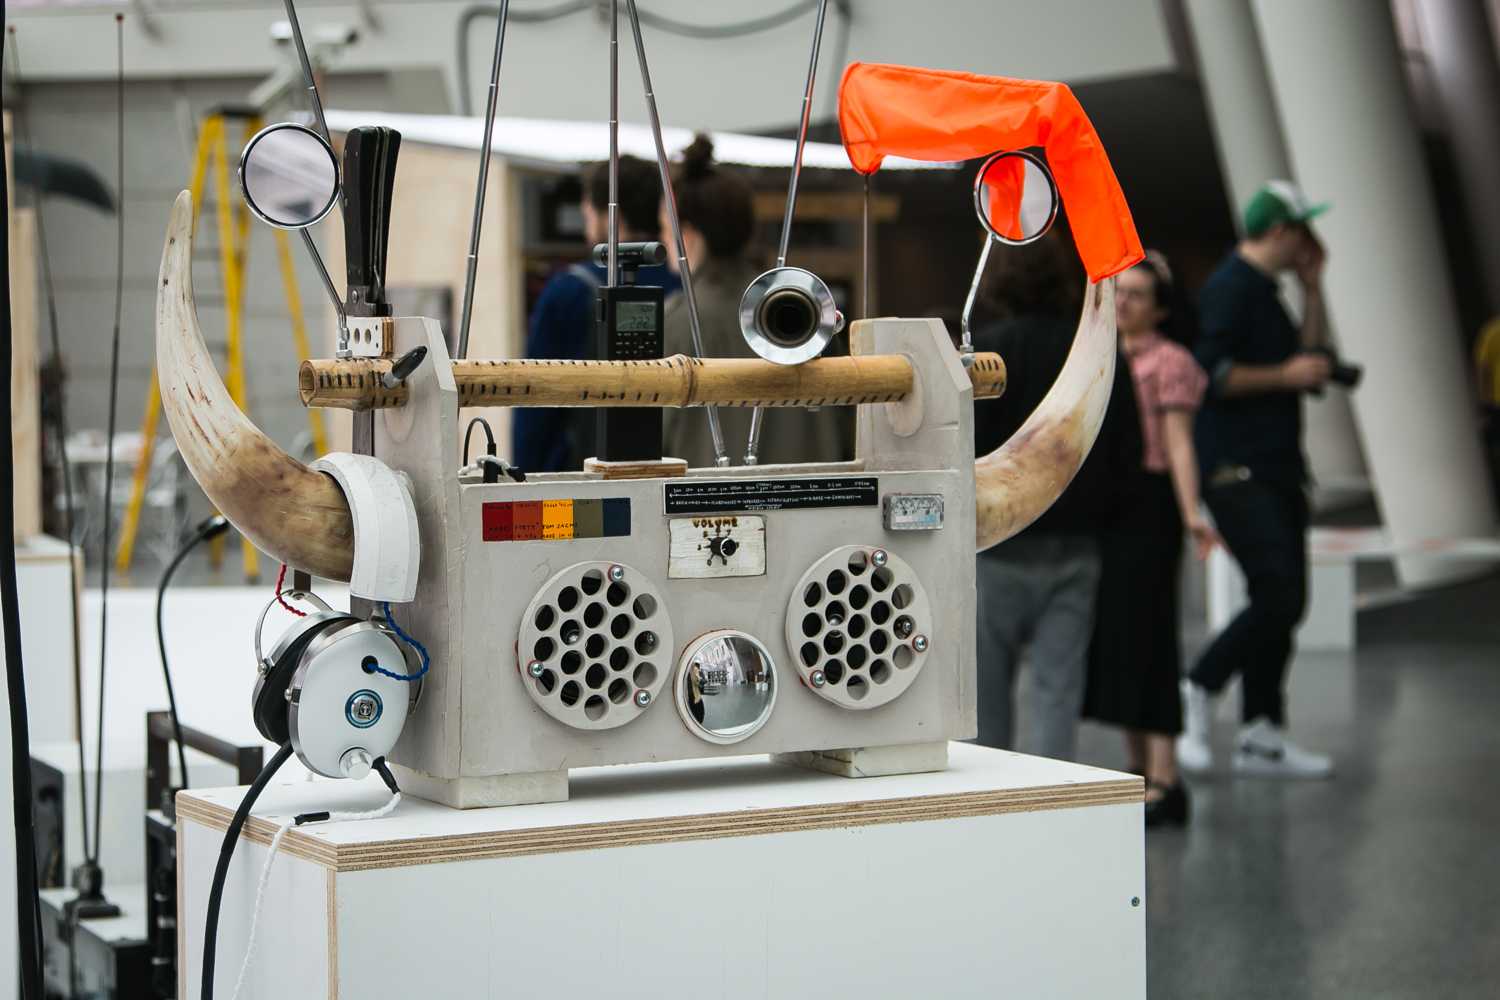 Tom+Sachs+Brings+the+Beat+to+the+Brooklyn+Museum+with+Boombox+Retrospective